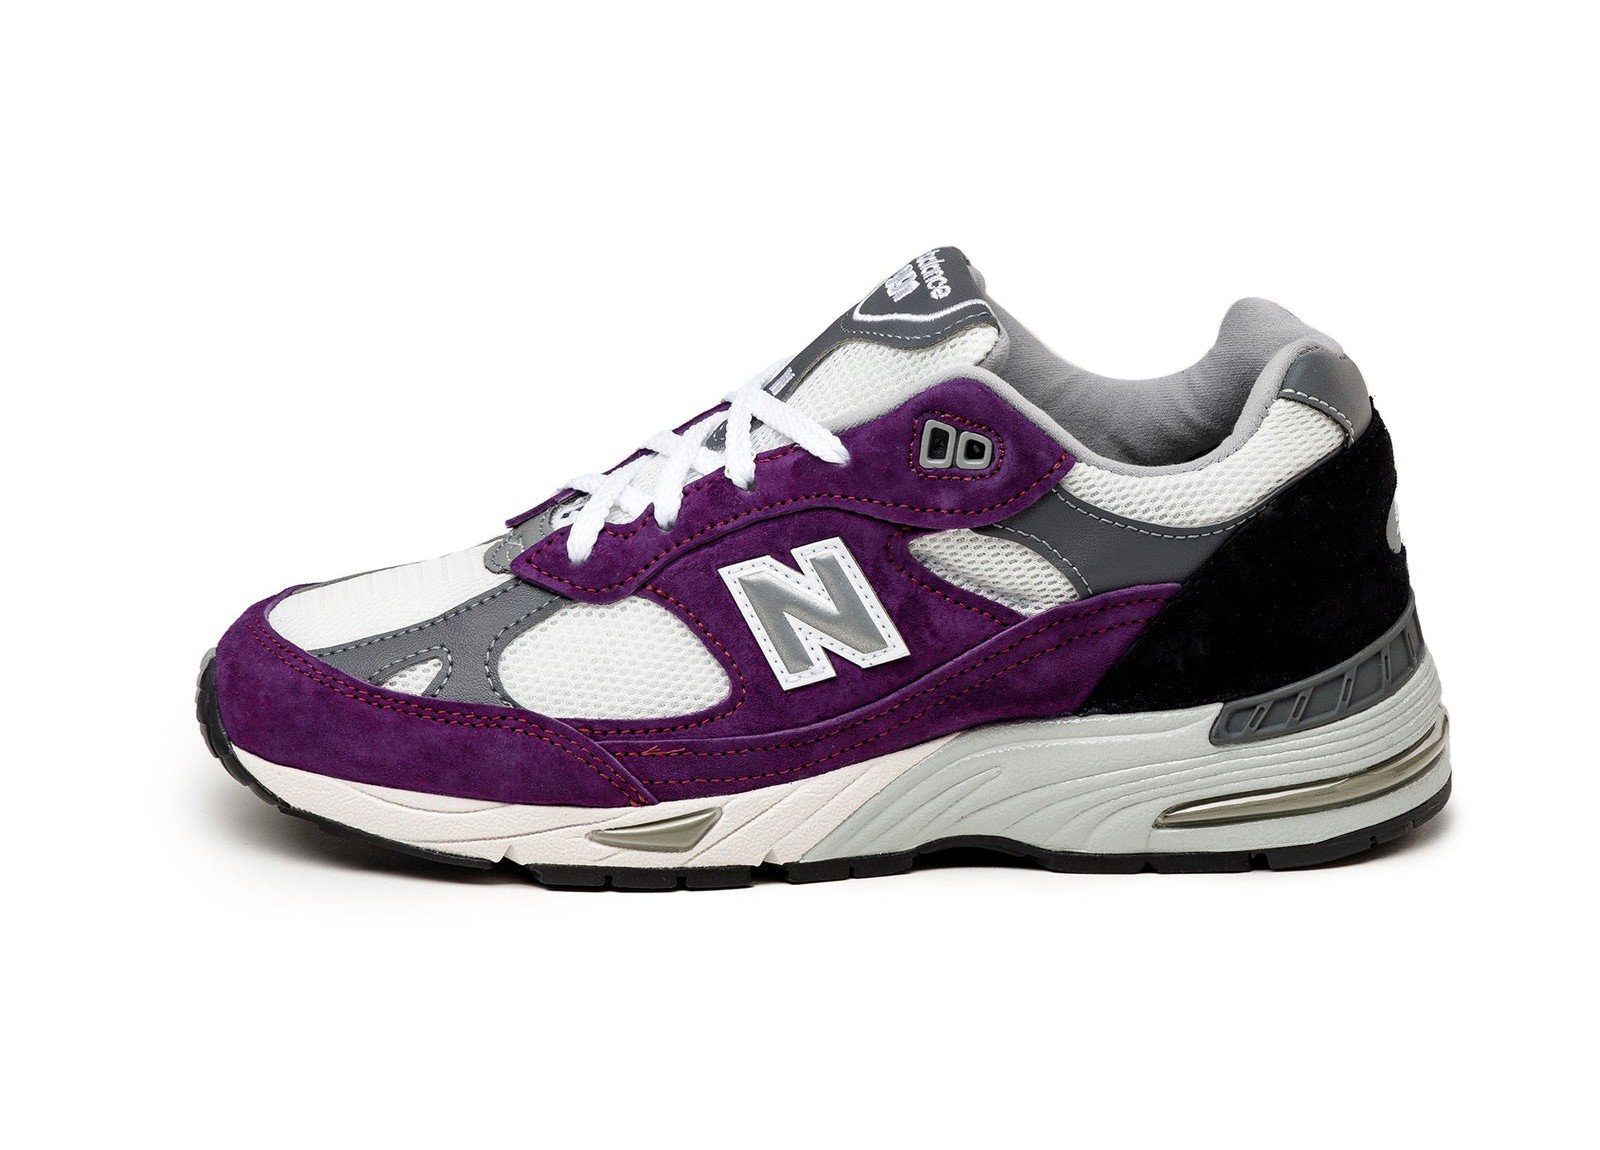 New Balance W991PUK
Made in England
Grape Juice / Alloy